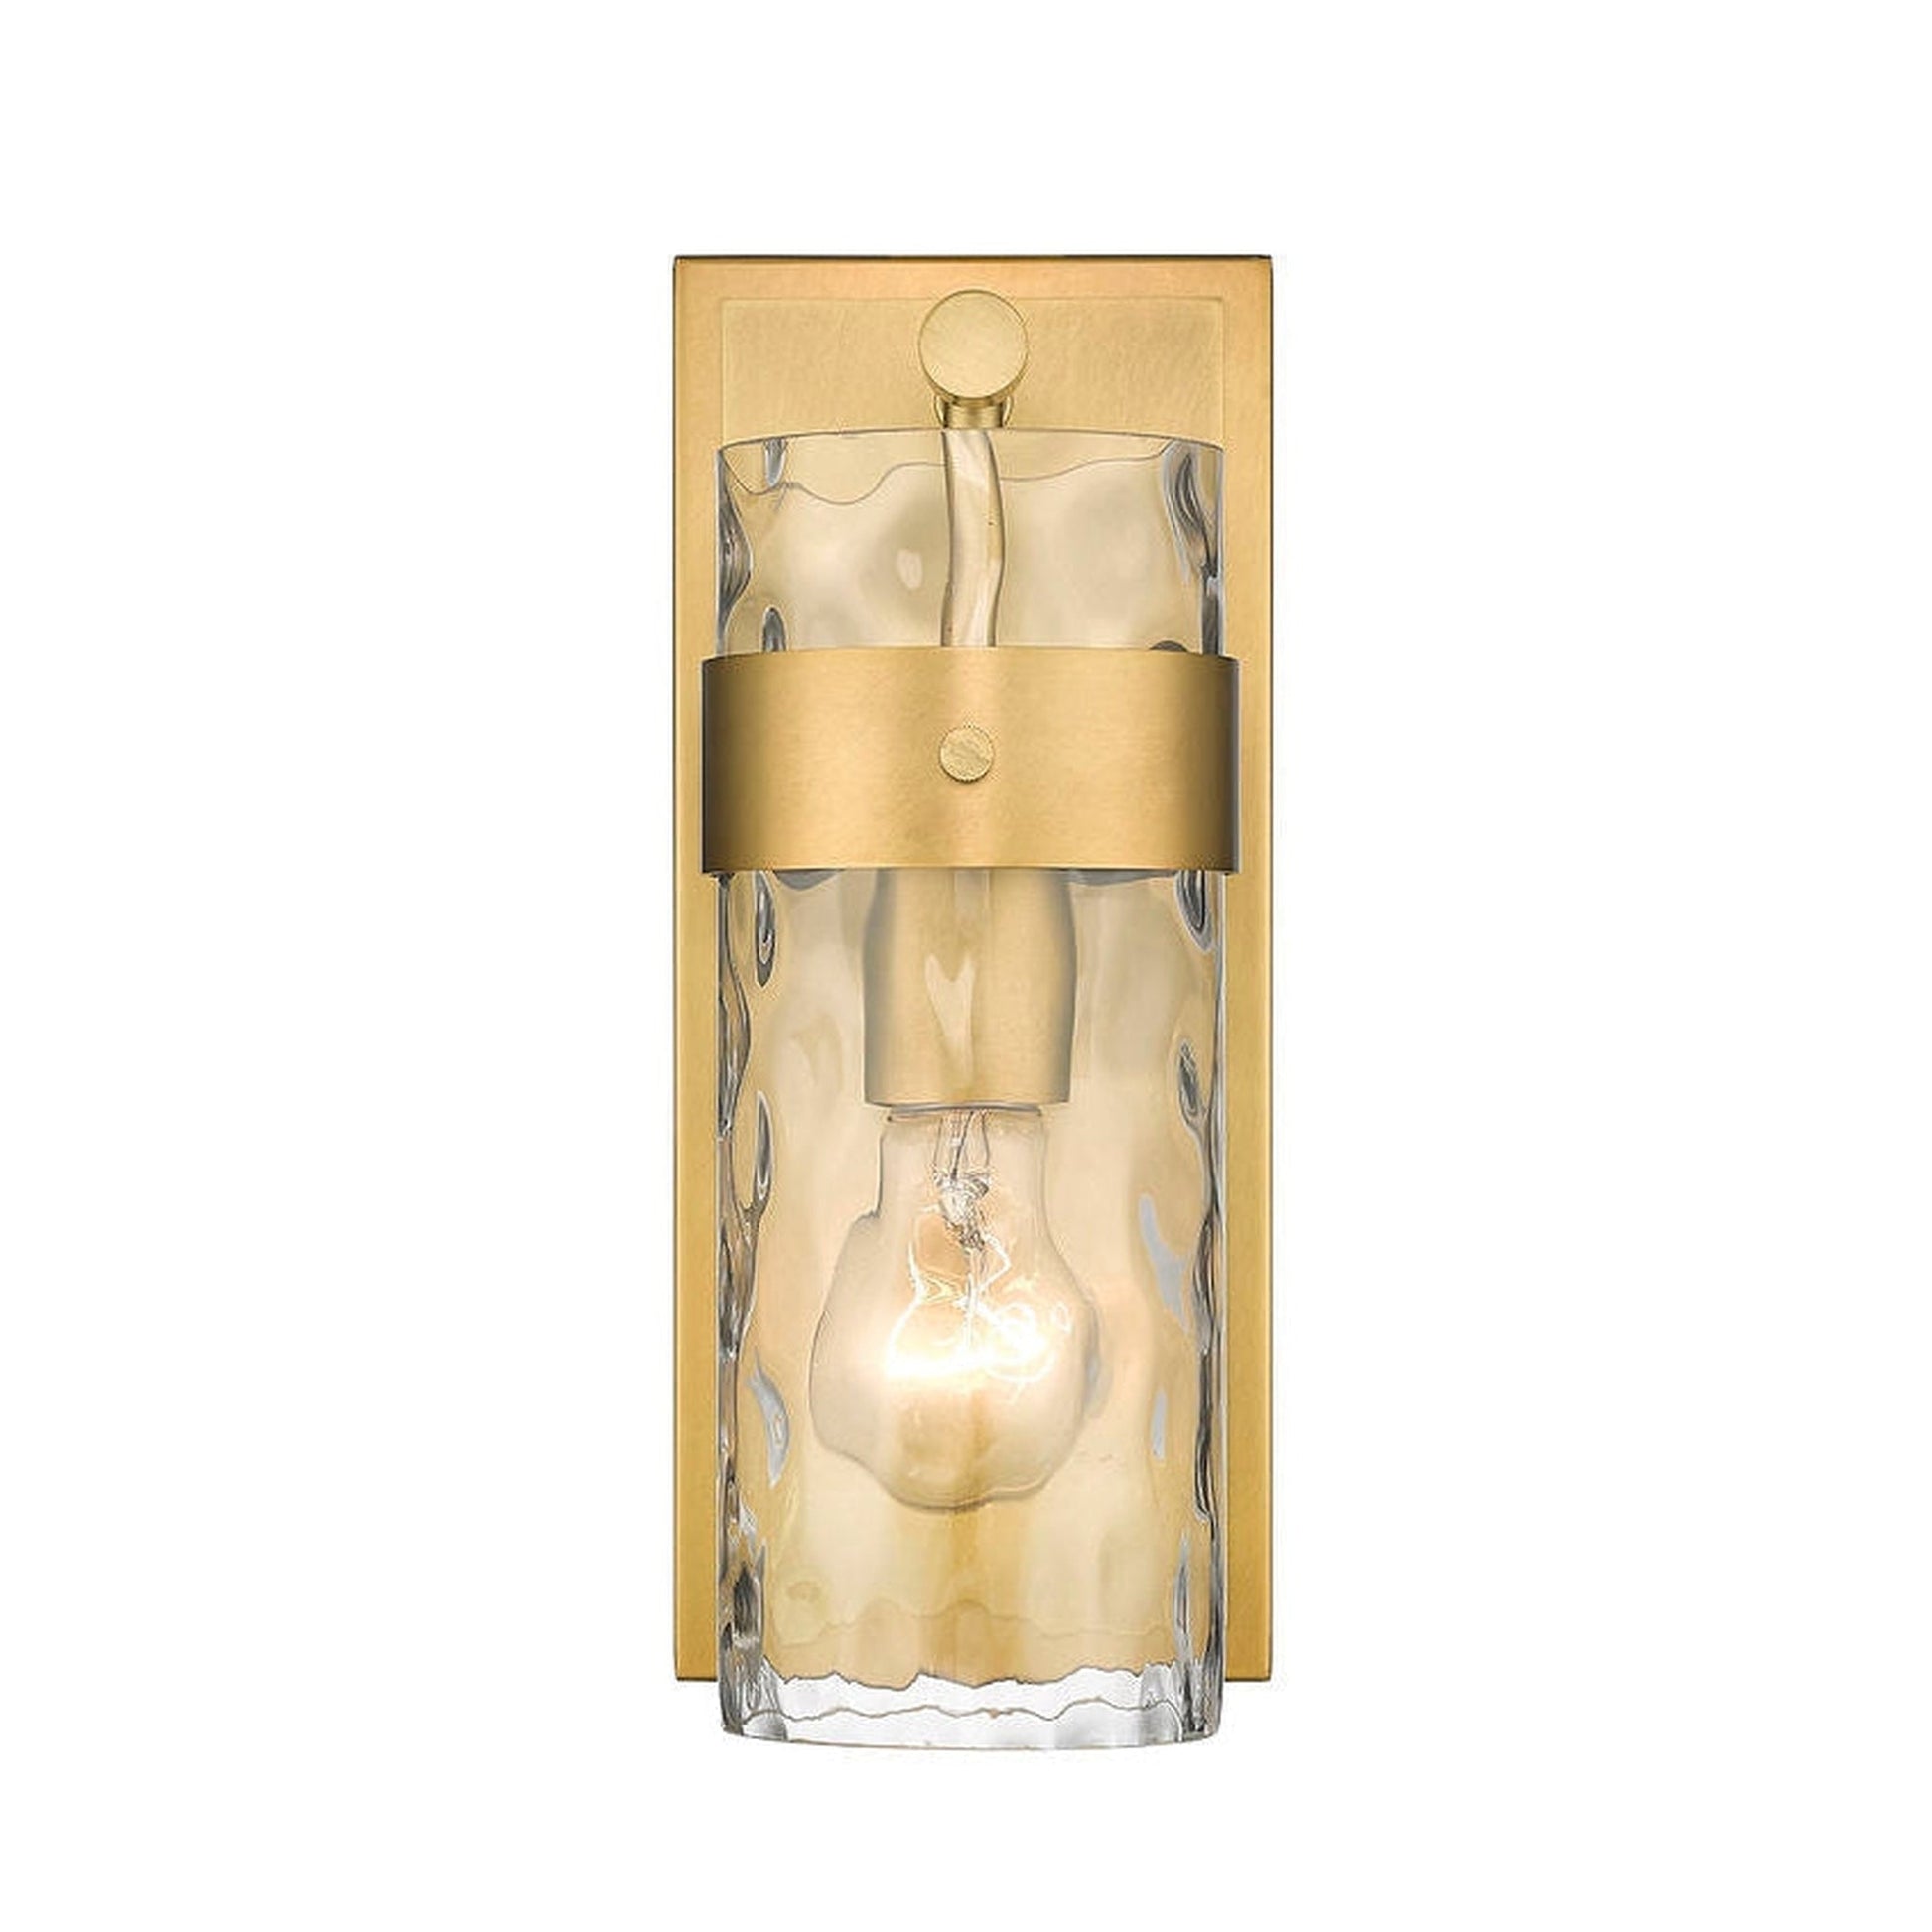 Z-Lite Fontaine 5" 1-Light Rubbed Brass Vanity Light With Clear Glass Shade